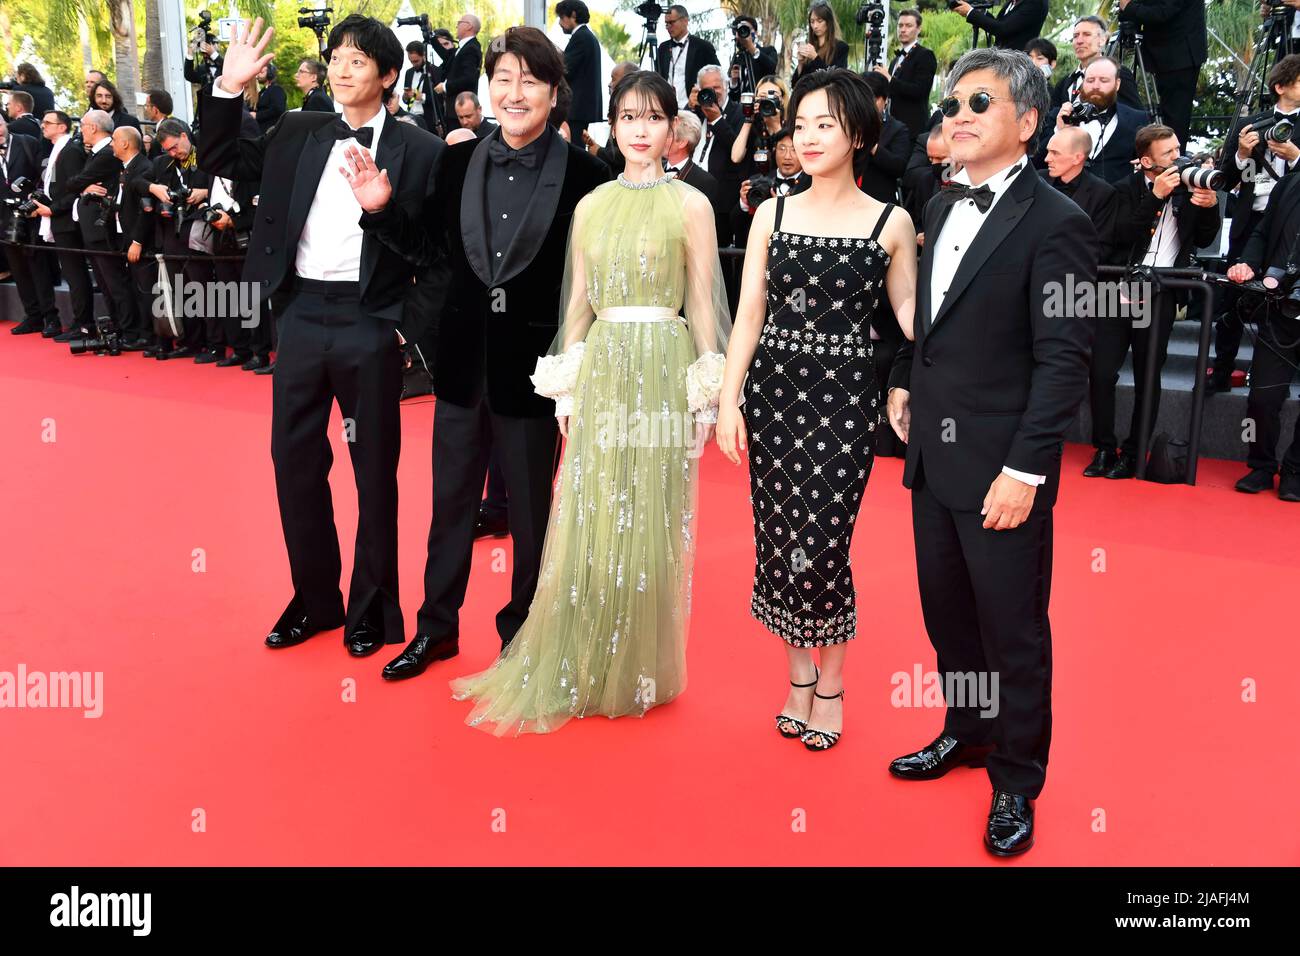 Hirokazu Koreeda (l-r), Joo-Young Lee, Hee-jin Choi, Kang-Ho Song and Dong-won Gang attend the closing ceremony of the 75th Cannes Film Festival at Palais des Festivals in Cannes, France, on 28 May 2022. Stock Photo